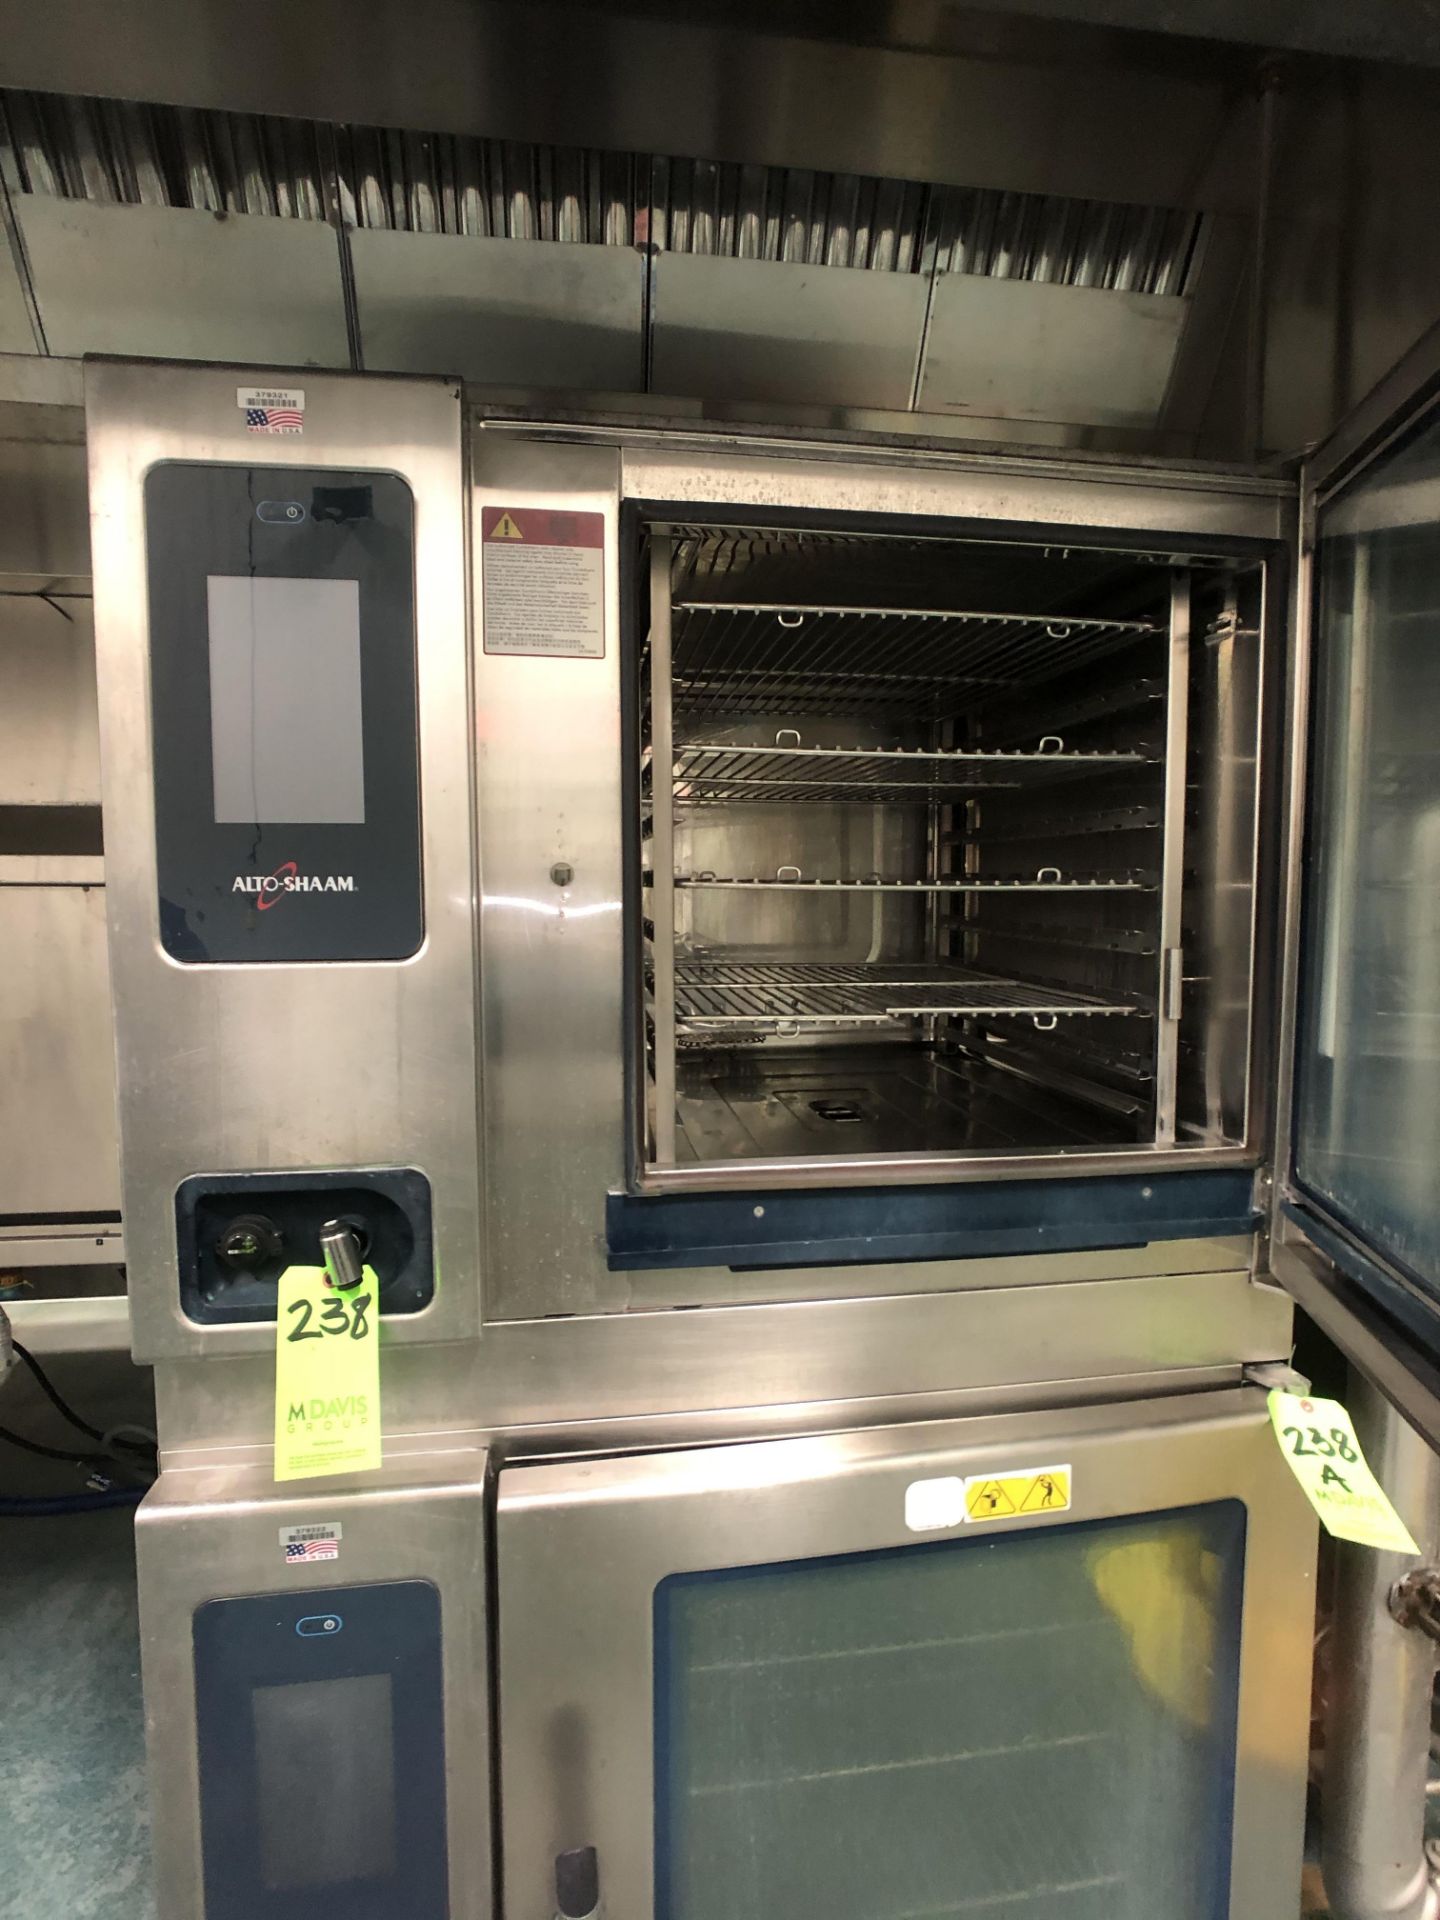 2016 ALTO-SHAAM COMBI OVENS, MODEL CTP7-20 - Image 8 of 10